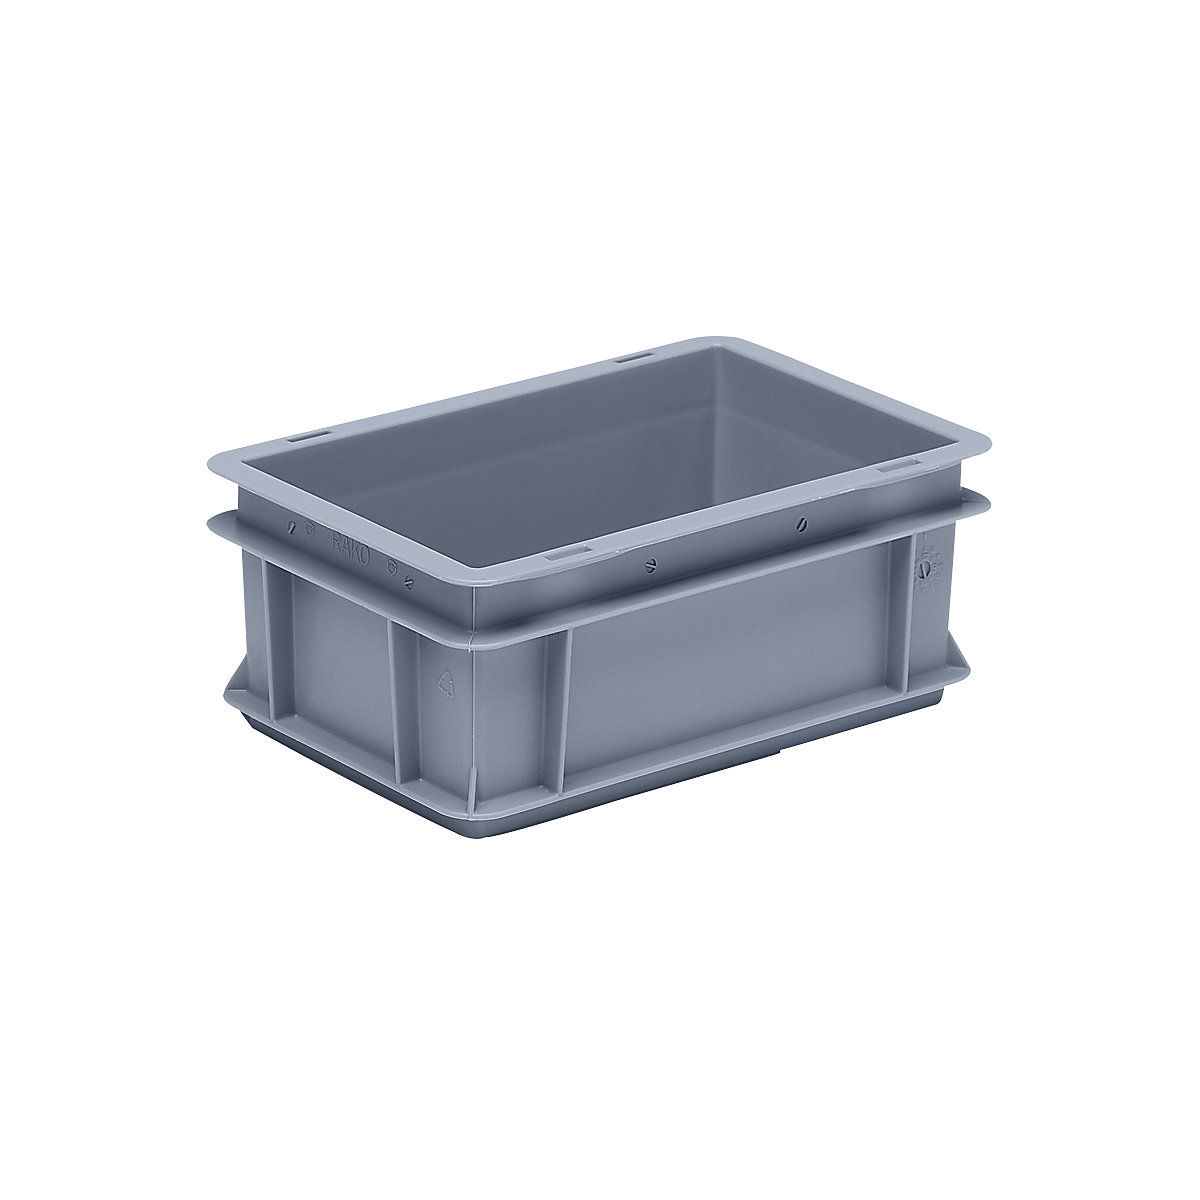 Euro stacking container made of polypropylene (PP), max. load 20 kg, silver grey, capacity 5 l, external height 120 mm, pack of 10-18